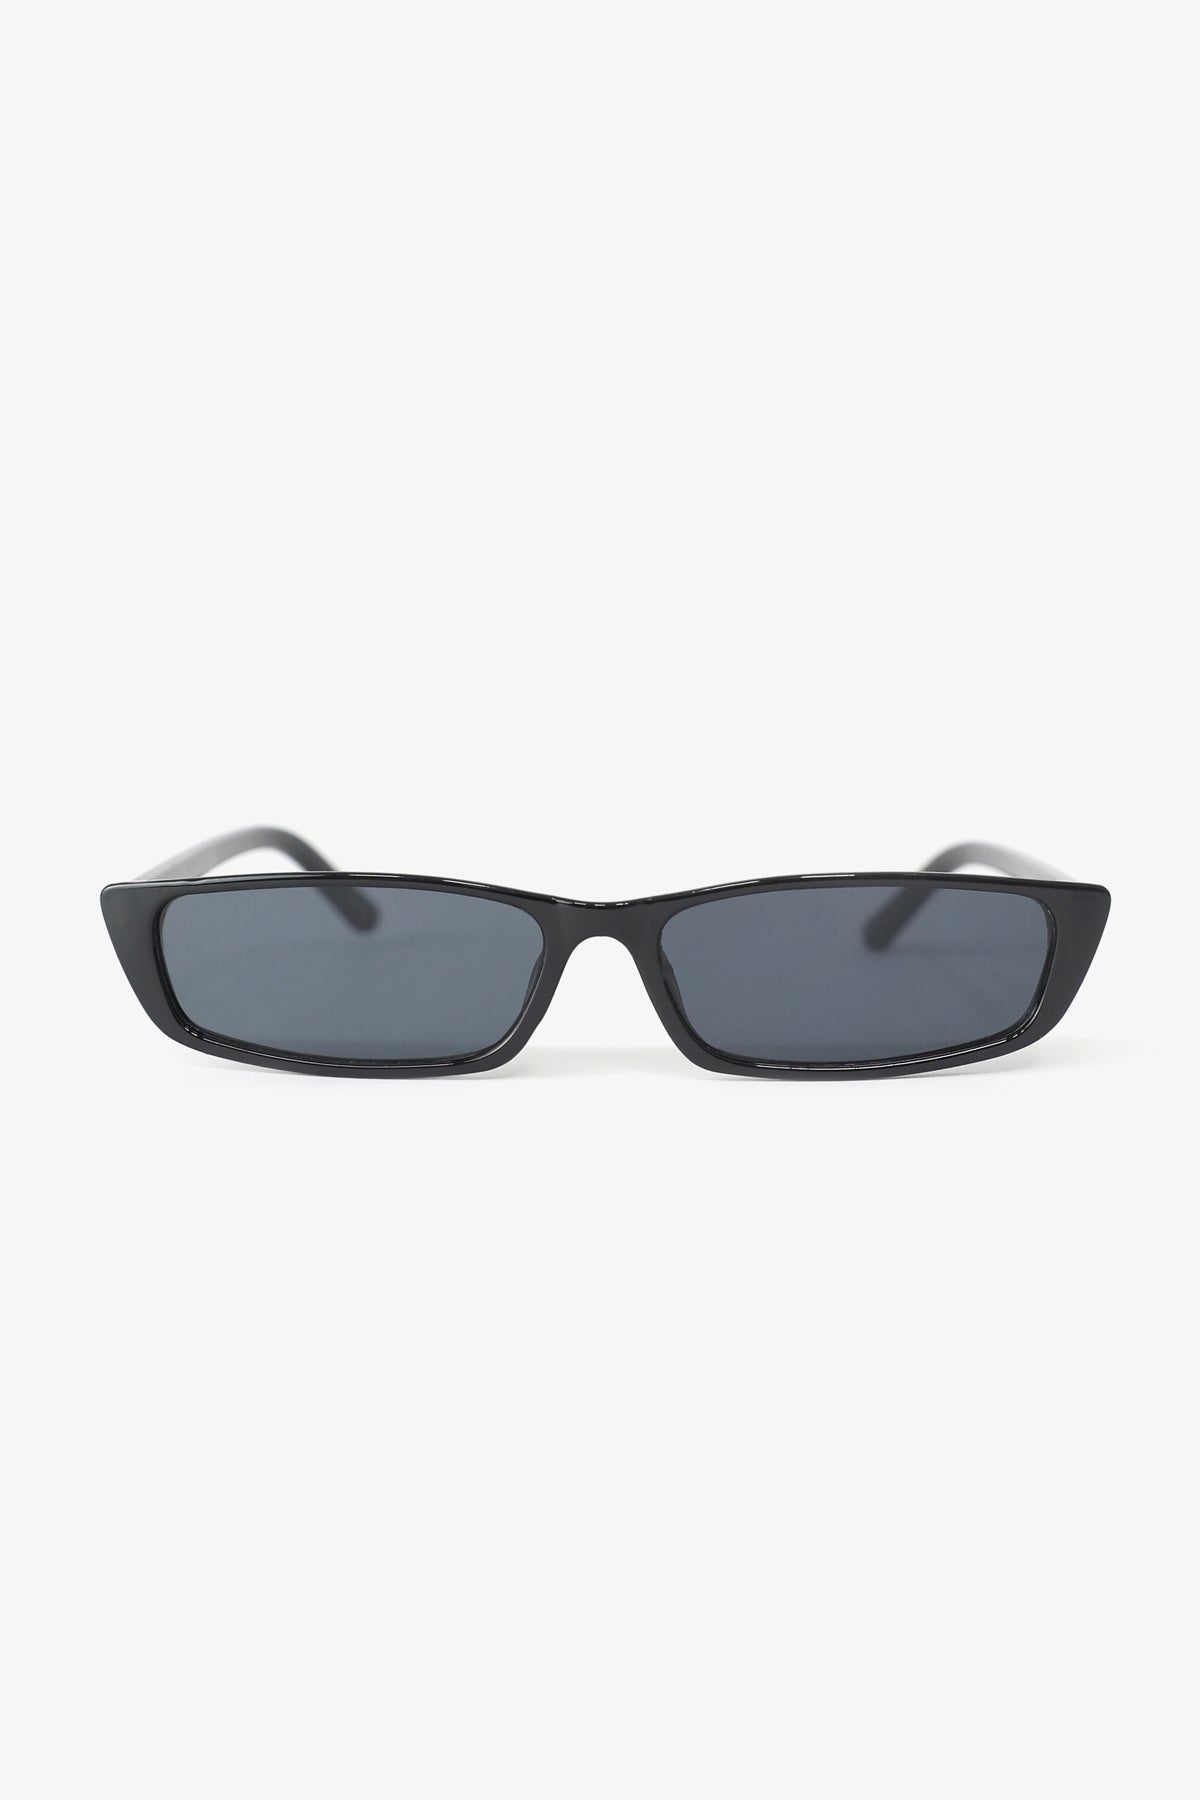 The Carrie thin black sunglasses.